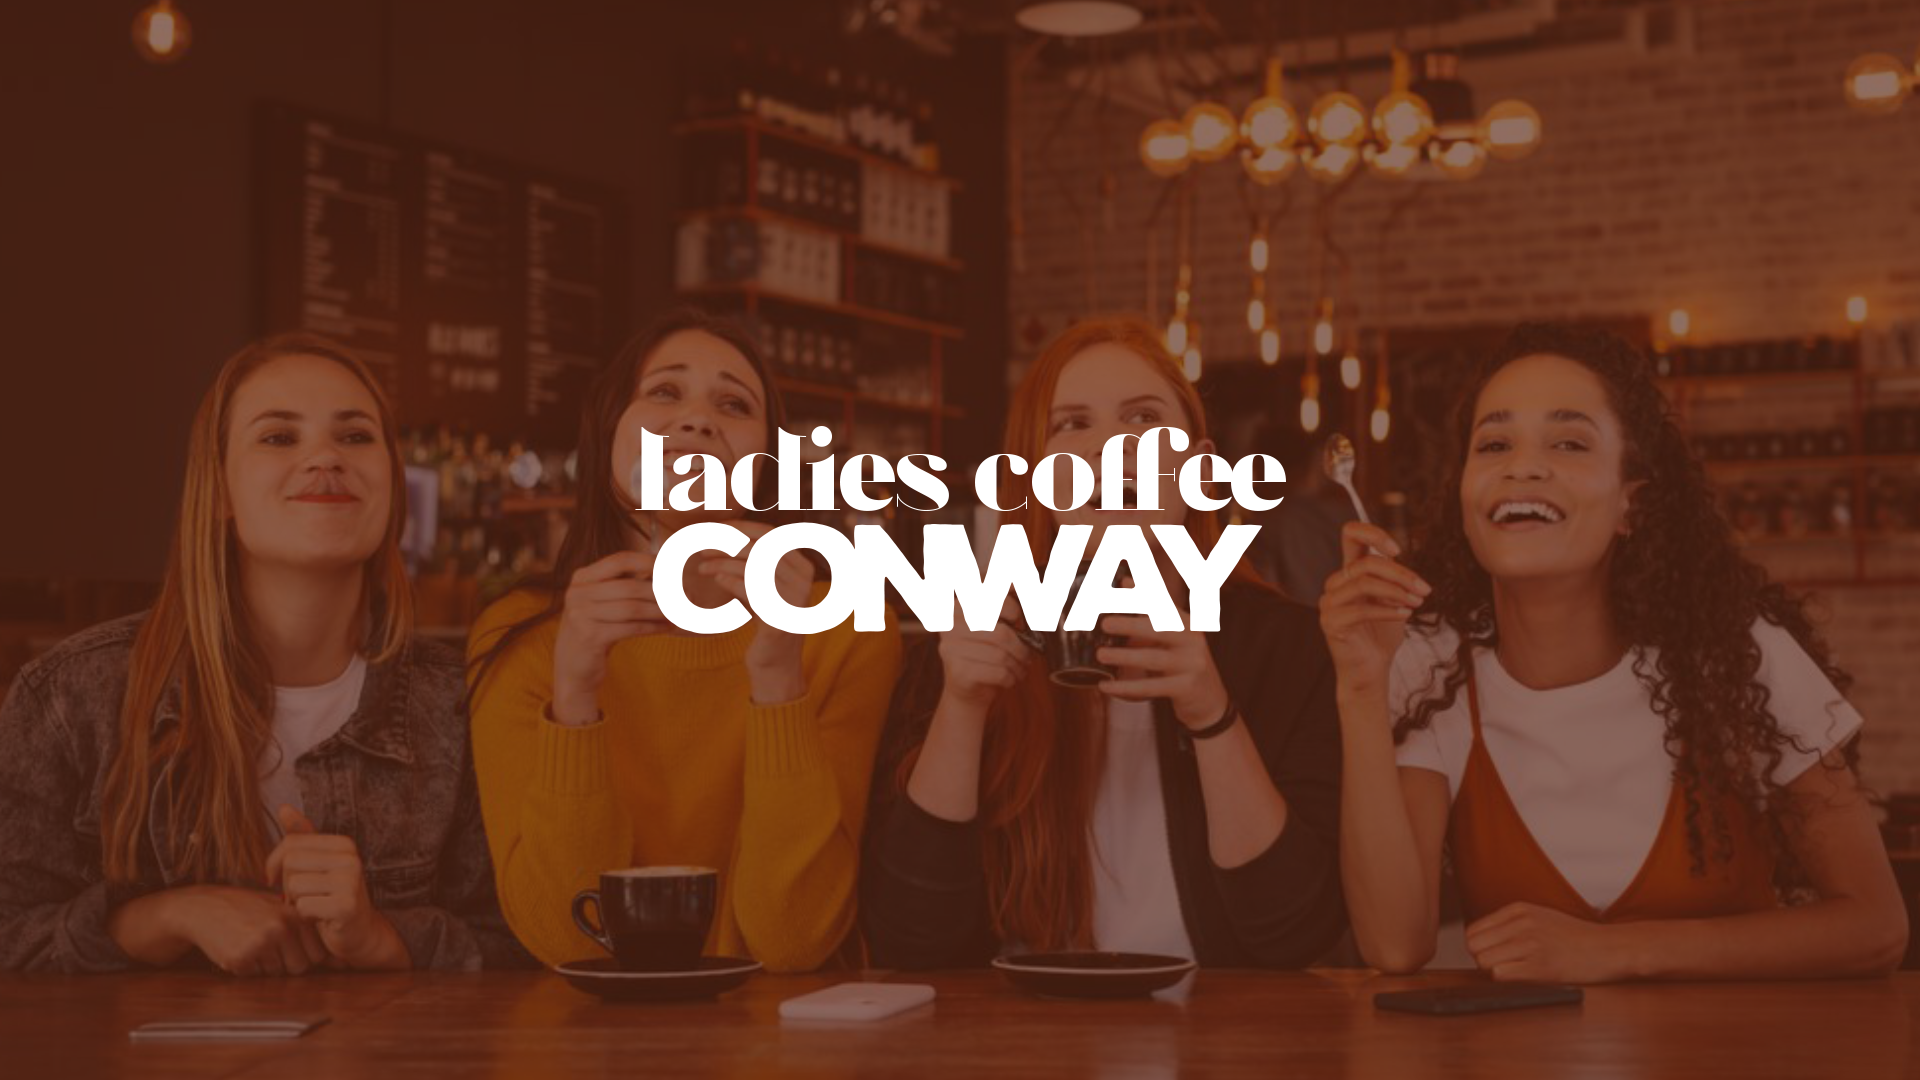 Conway Ladies Coffee & Networking